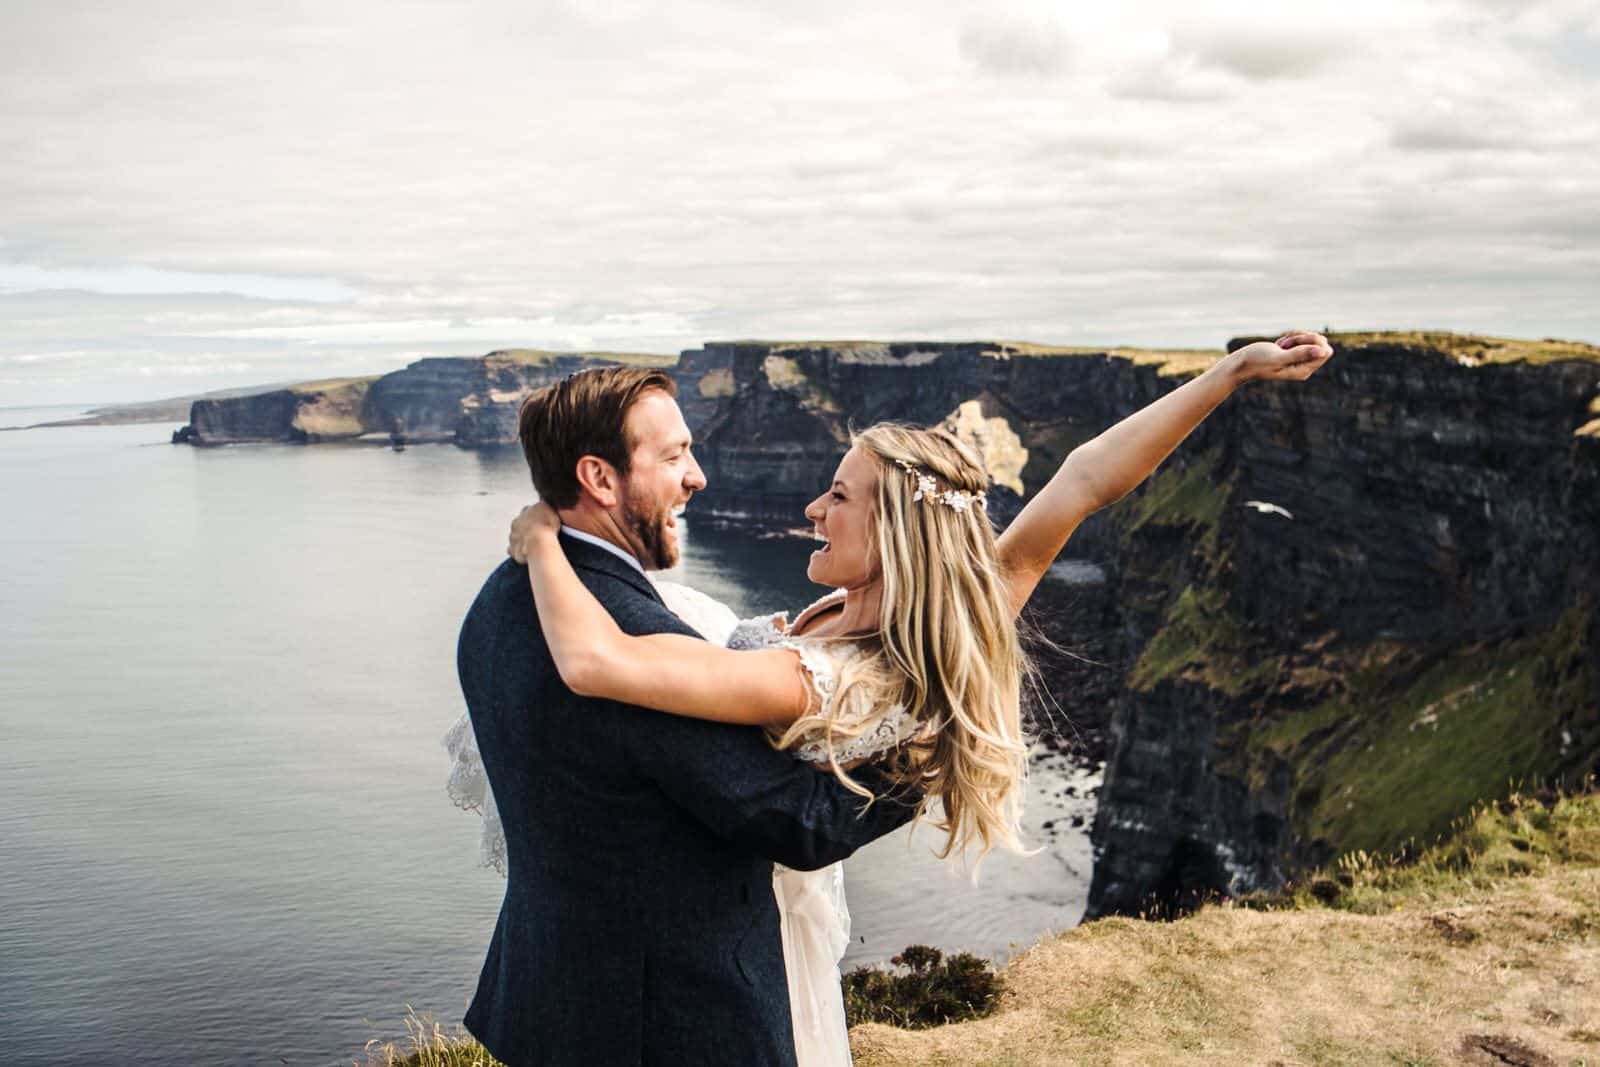 Celebrating at the cliffs of Moher for their destination wedding